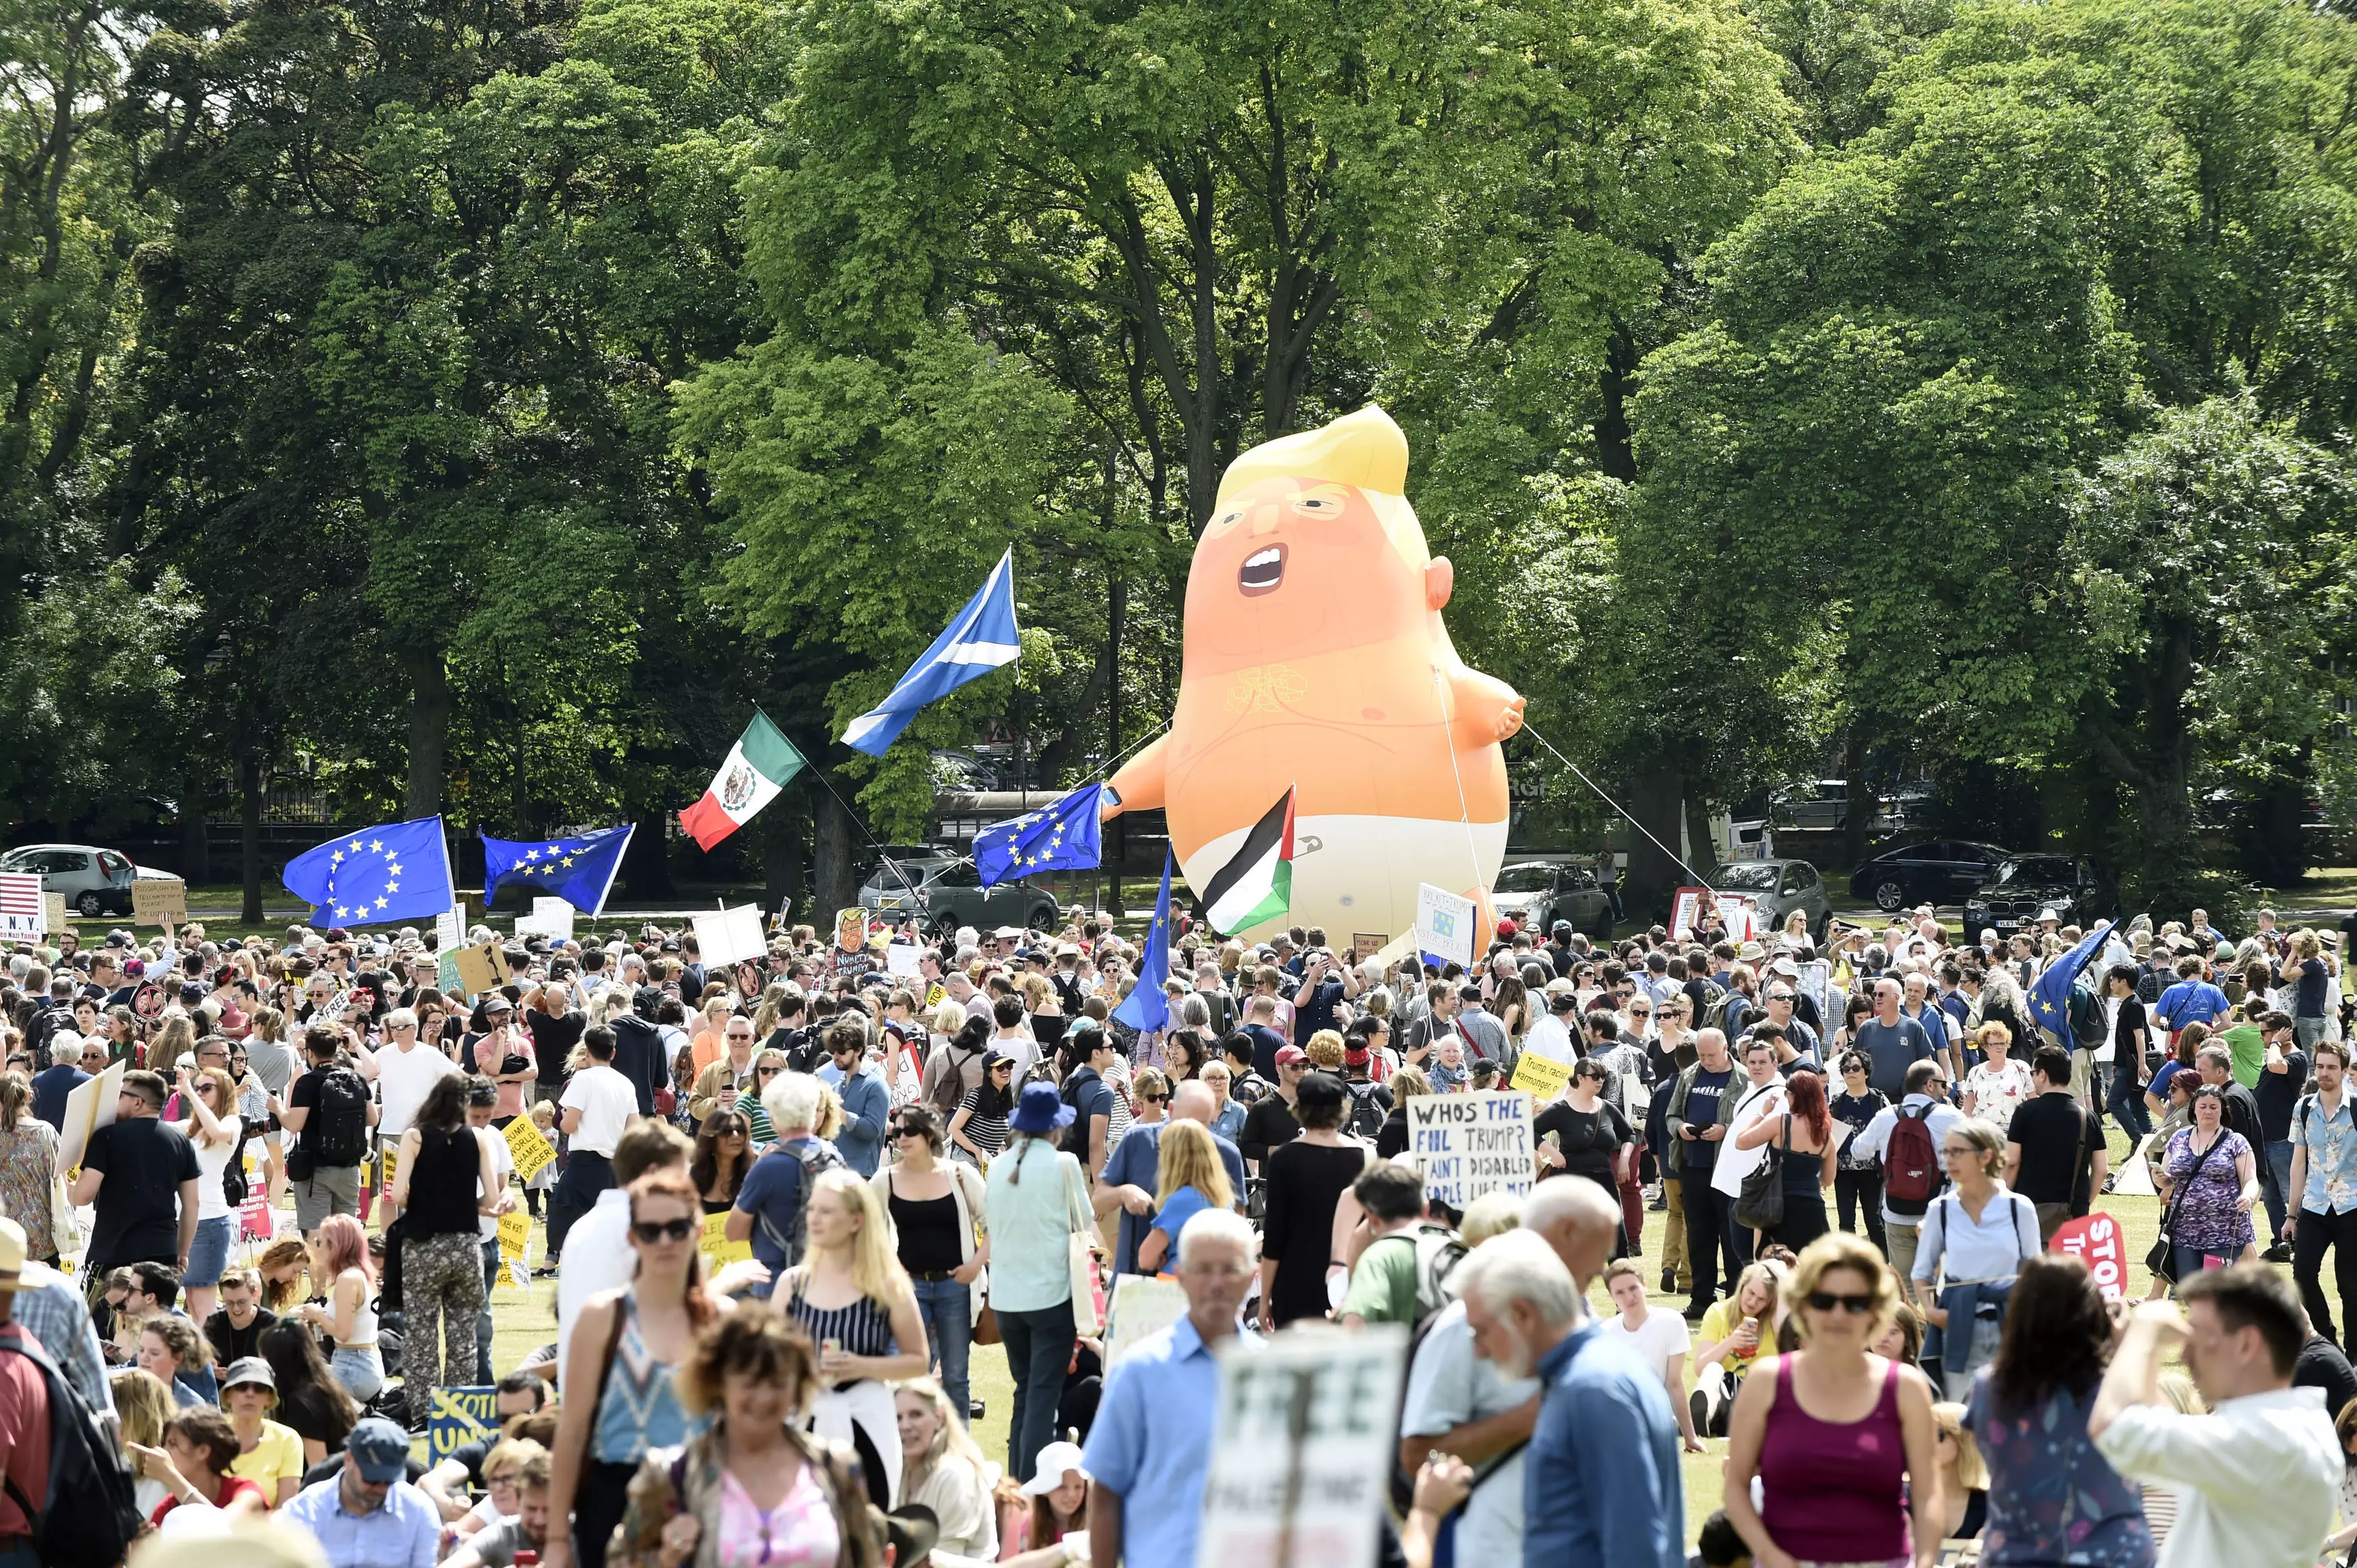 The Trump baby blimp made an appearance in Scotland.